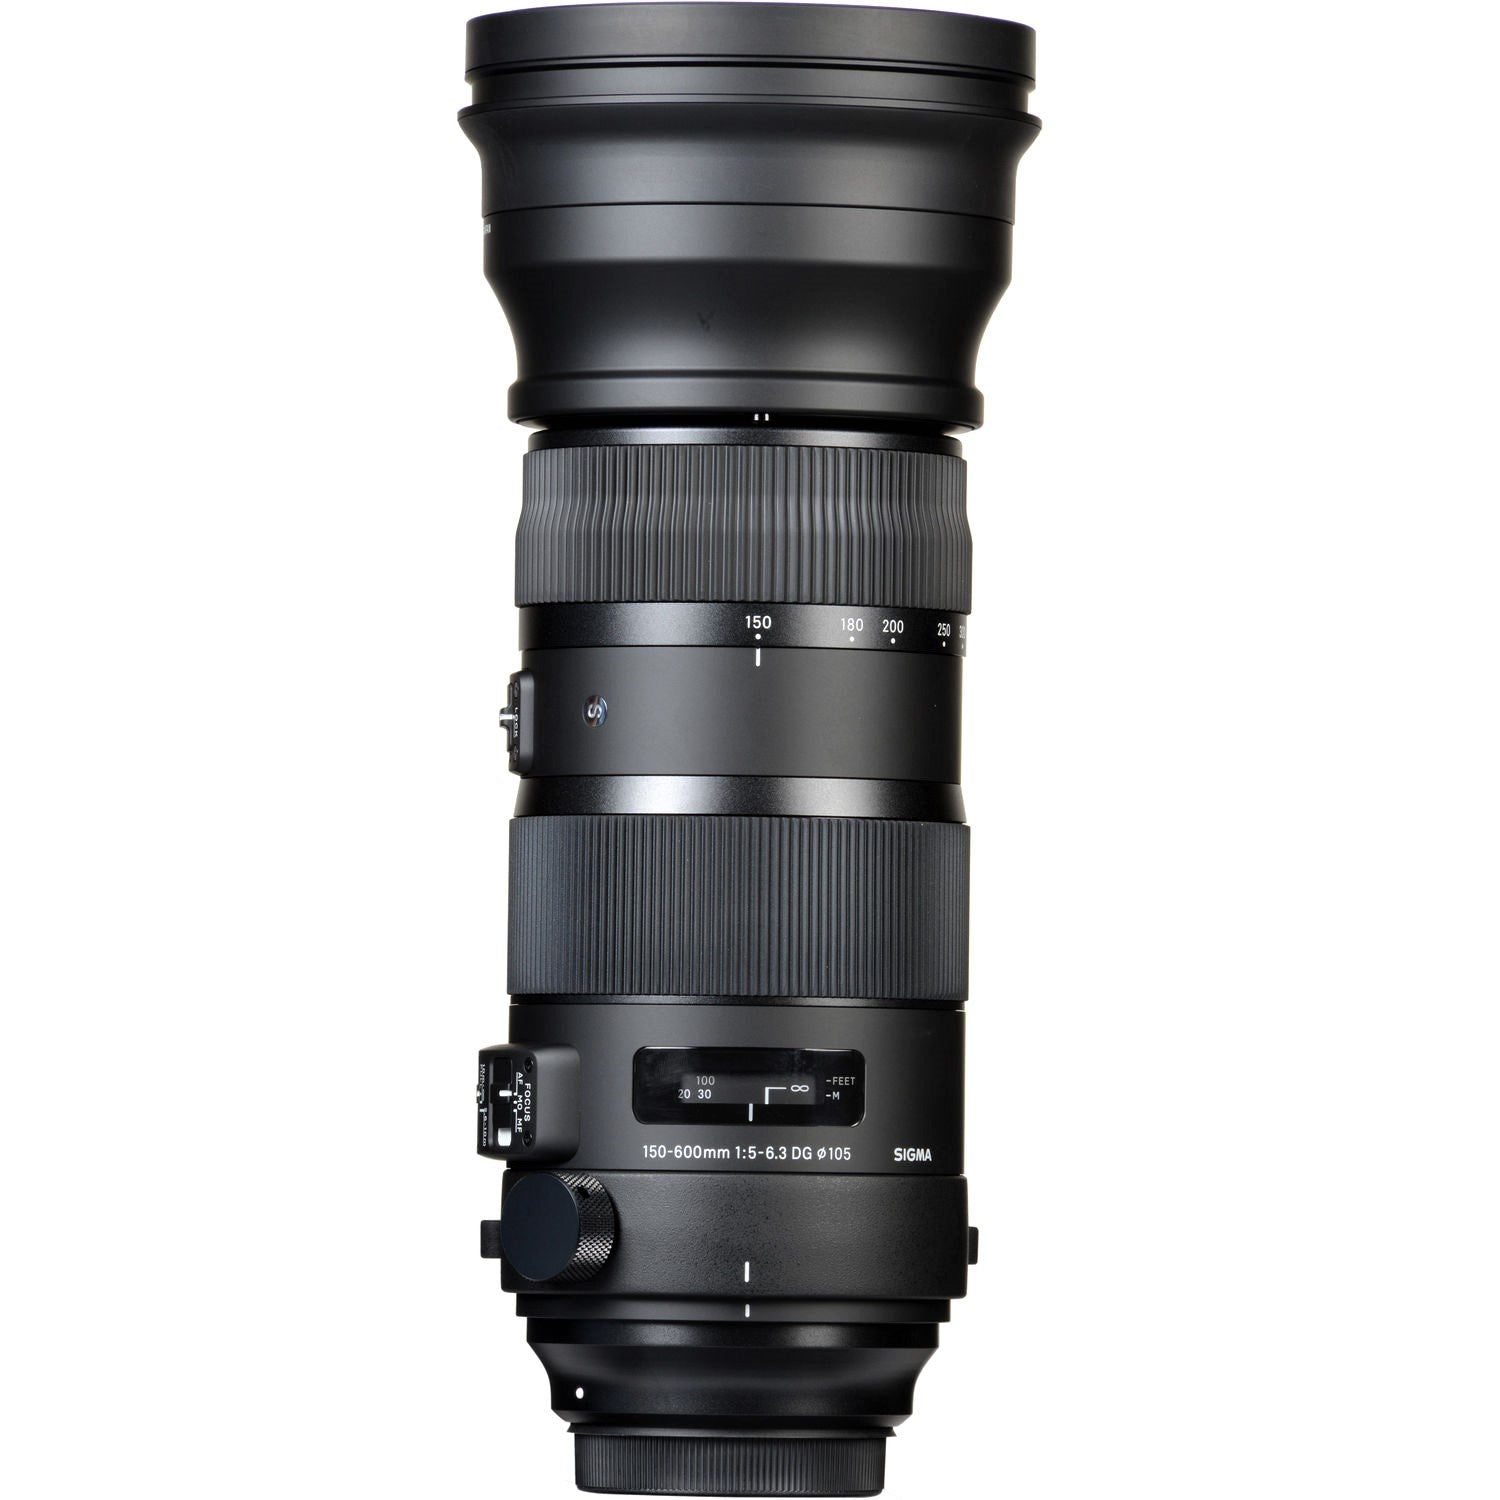 Sigma 150-600mm F5-6.3 DG OS HSM Sports Lens for Nikon F with Attached Lens Hood on the Top